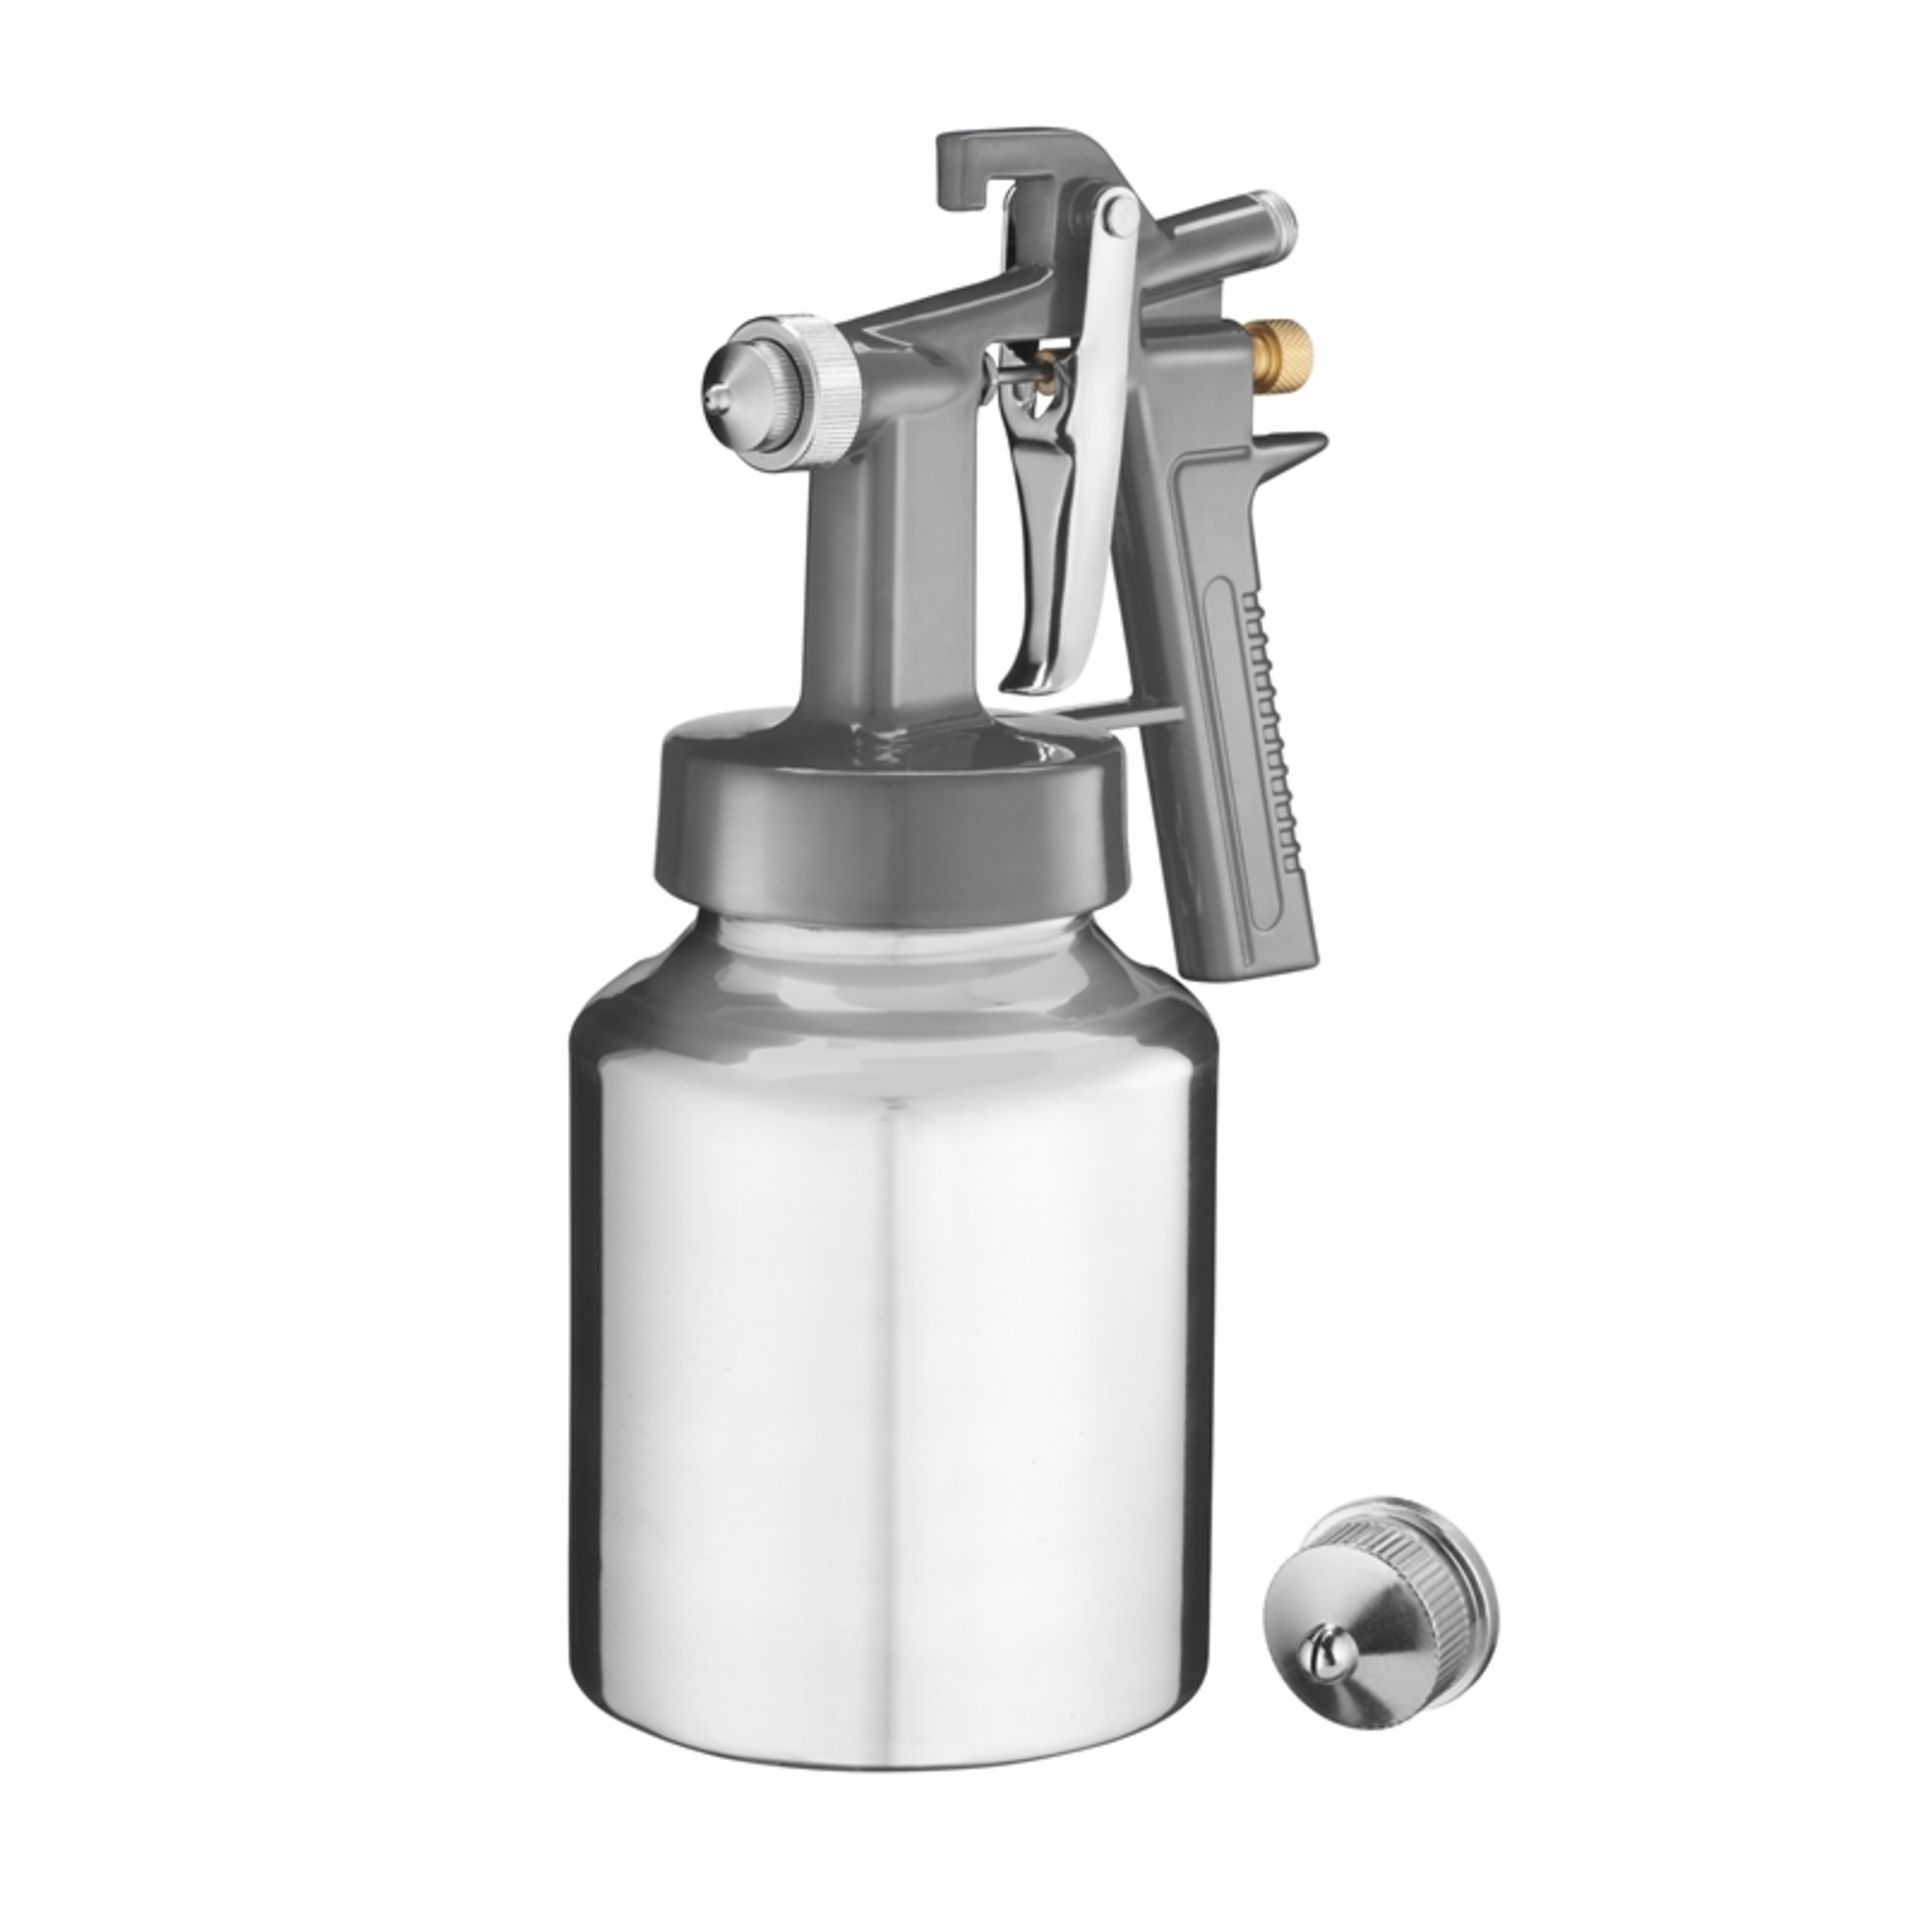 + VAT Brand New Ozito Spray Putty Gun-160-260ml/Min Ideal For Spraying Fillers-Two Nozzles-Fluid